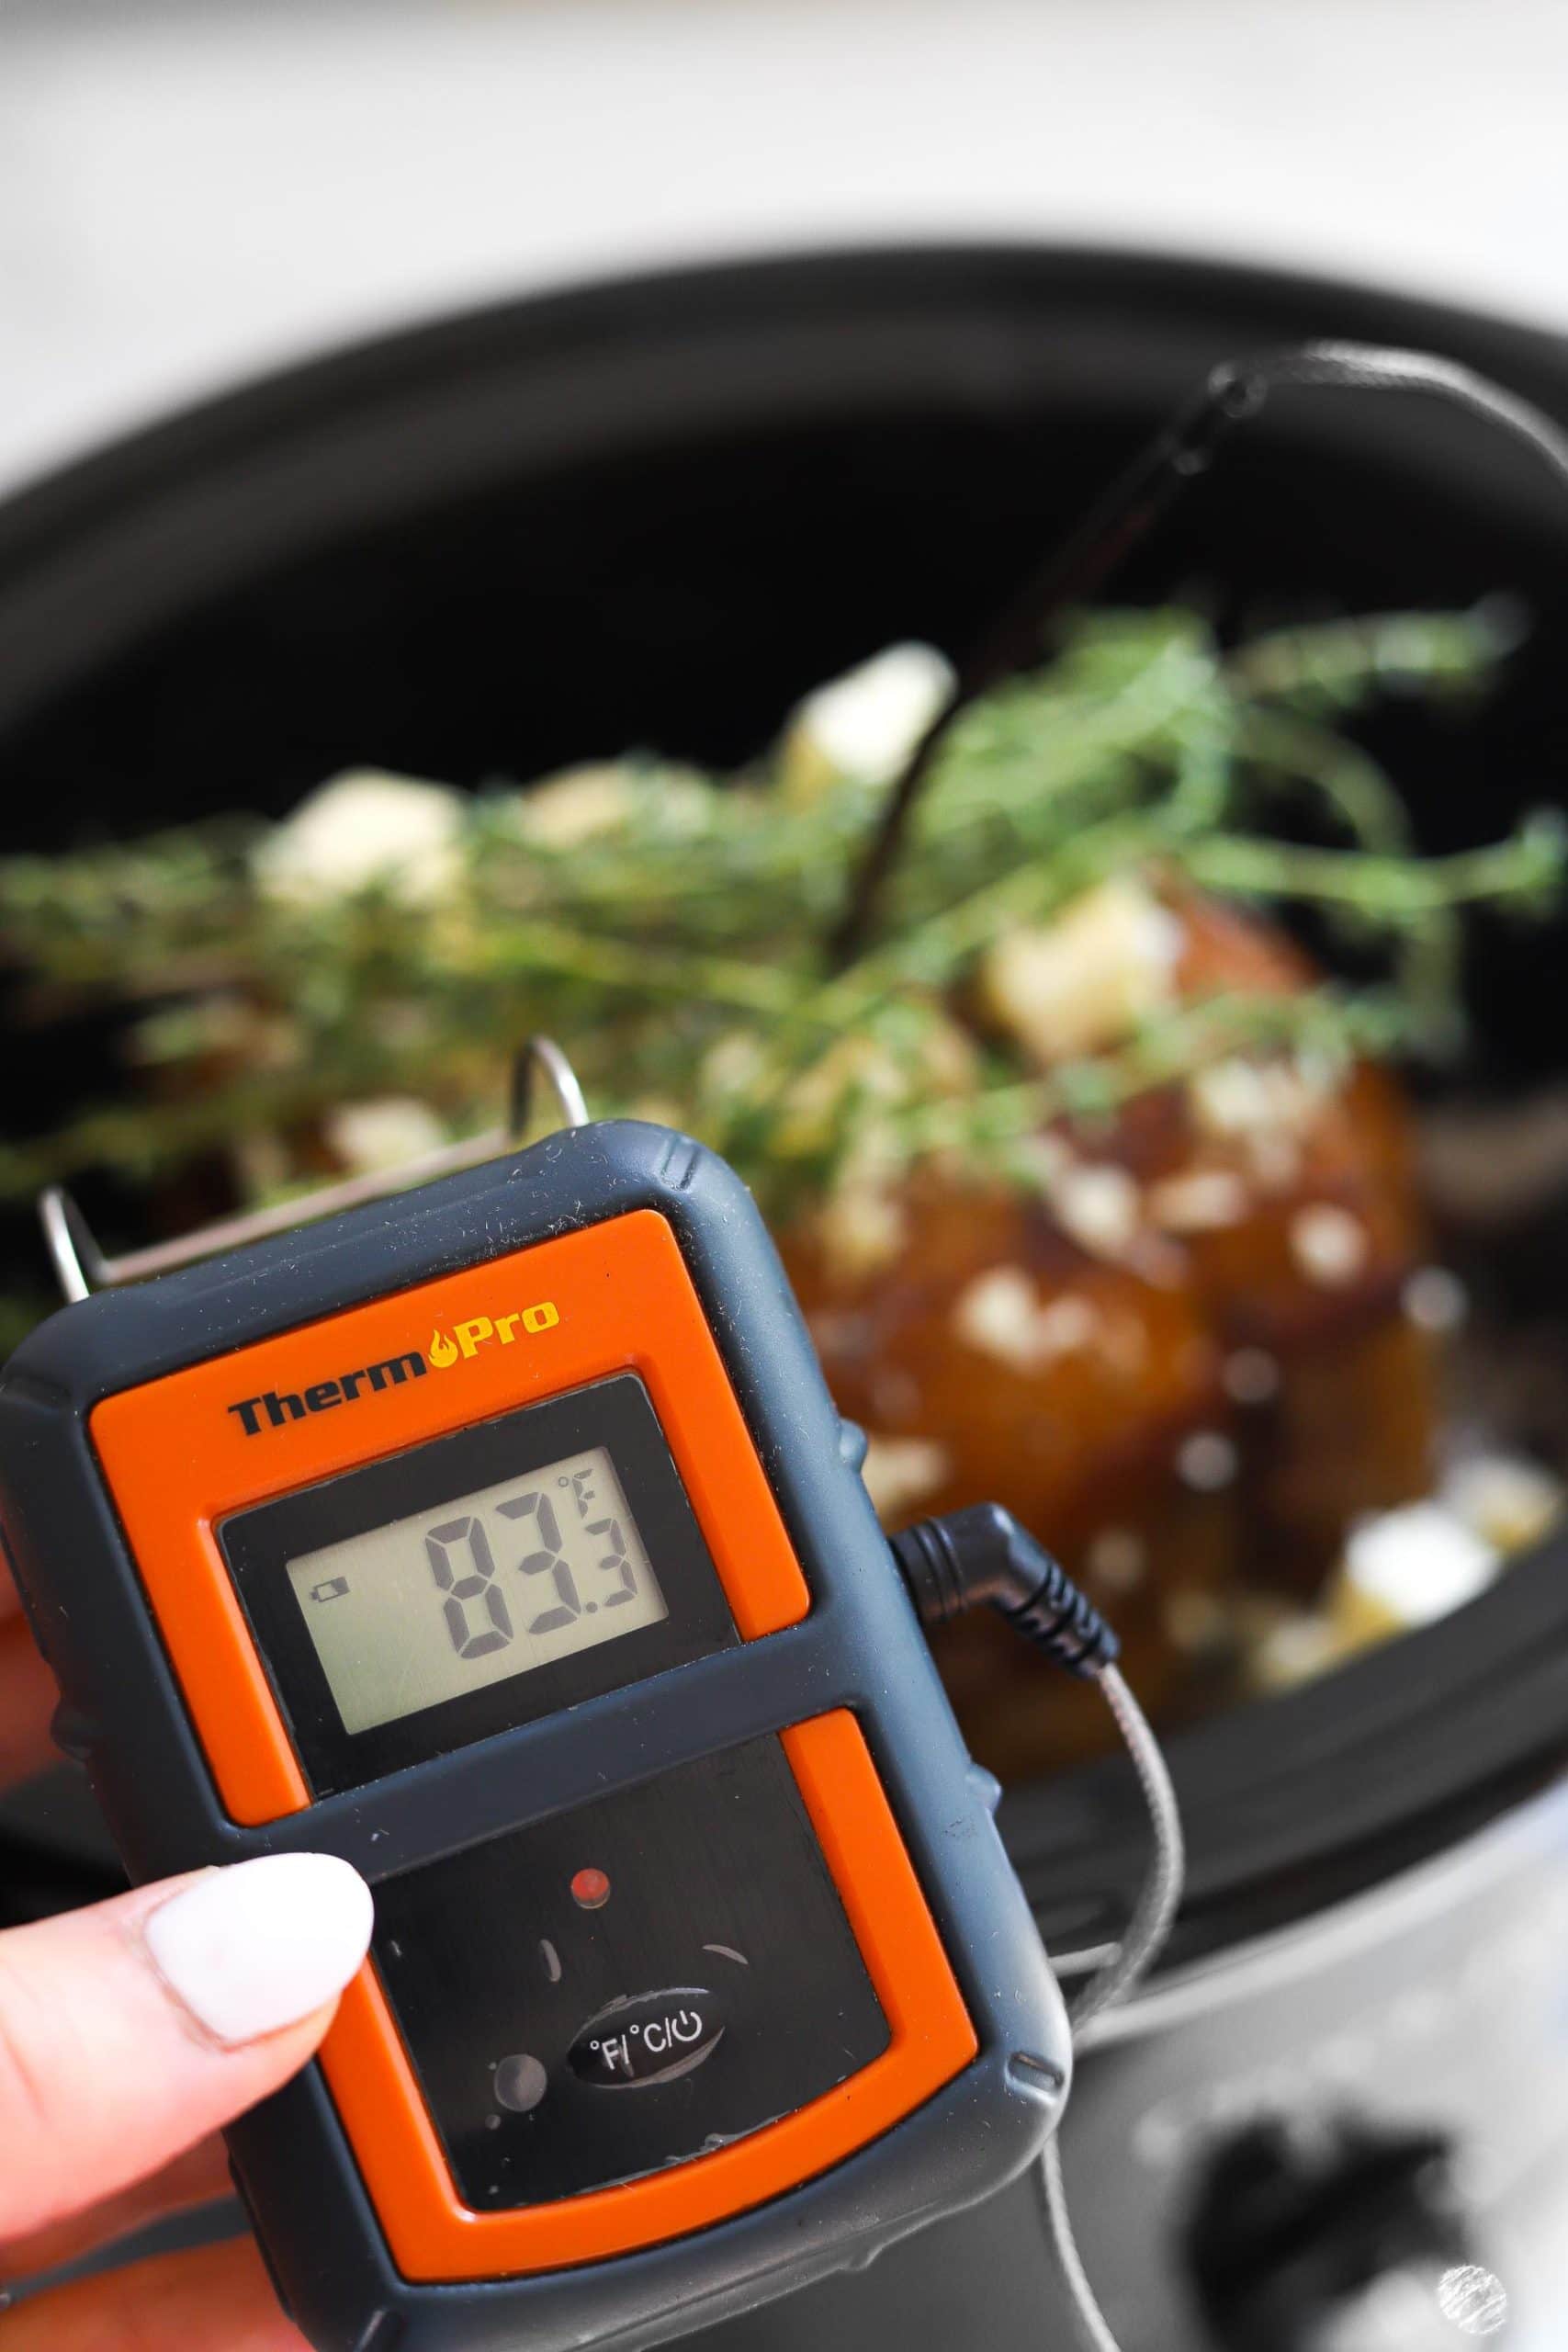 meat thermometer shown next to pork loin in crock pot